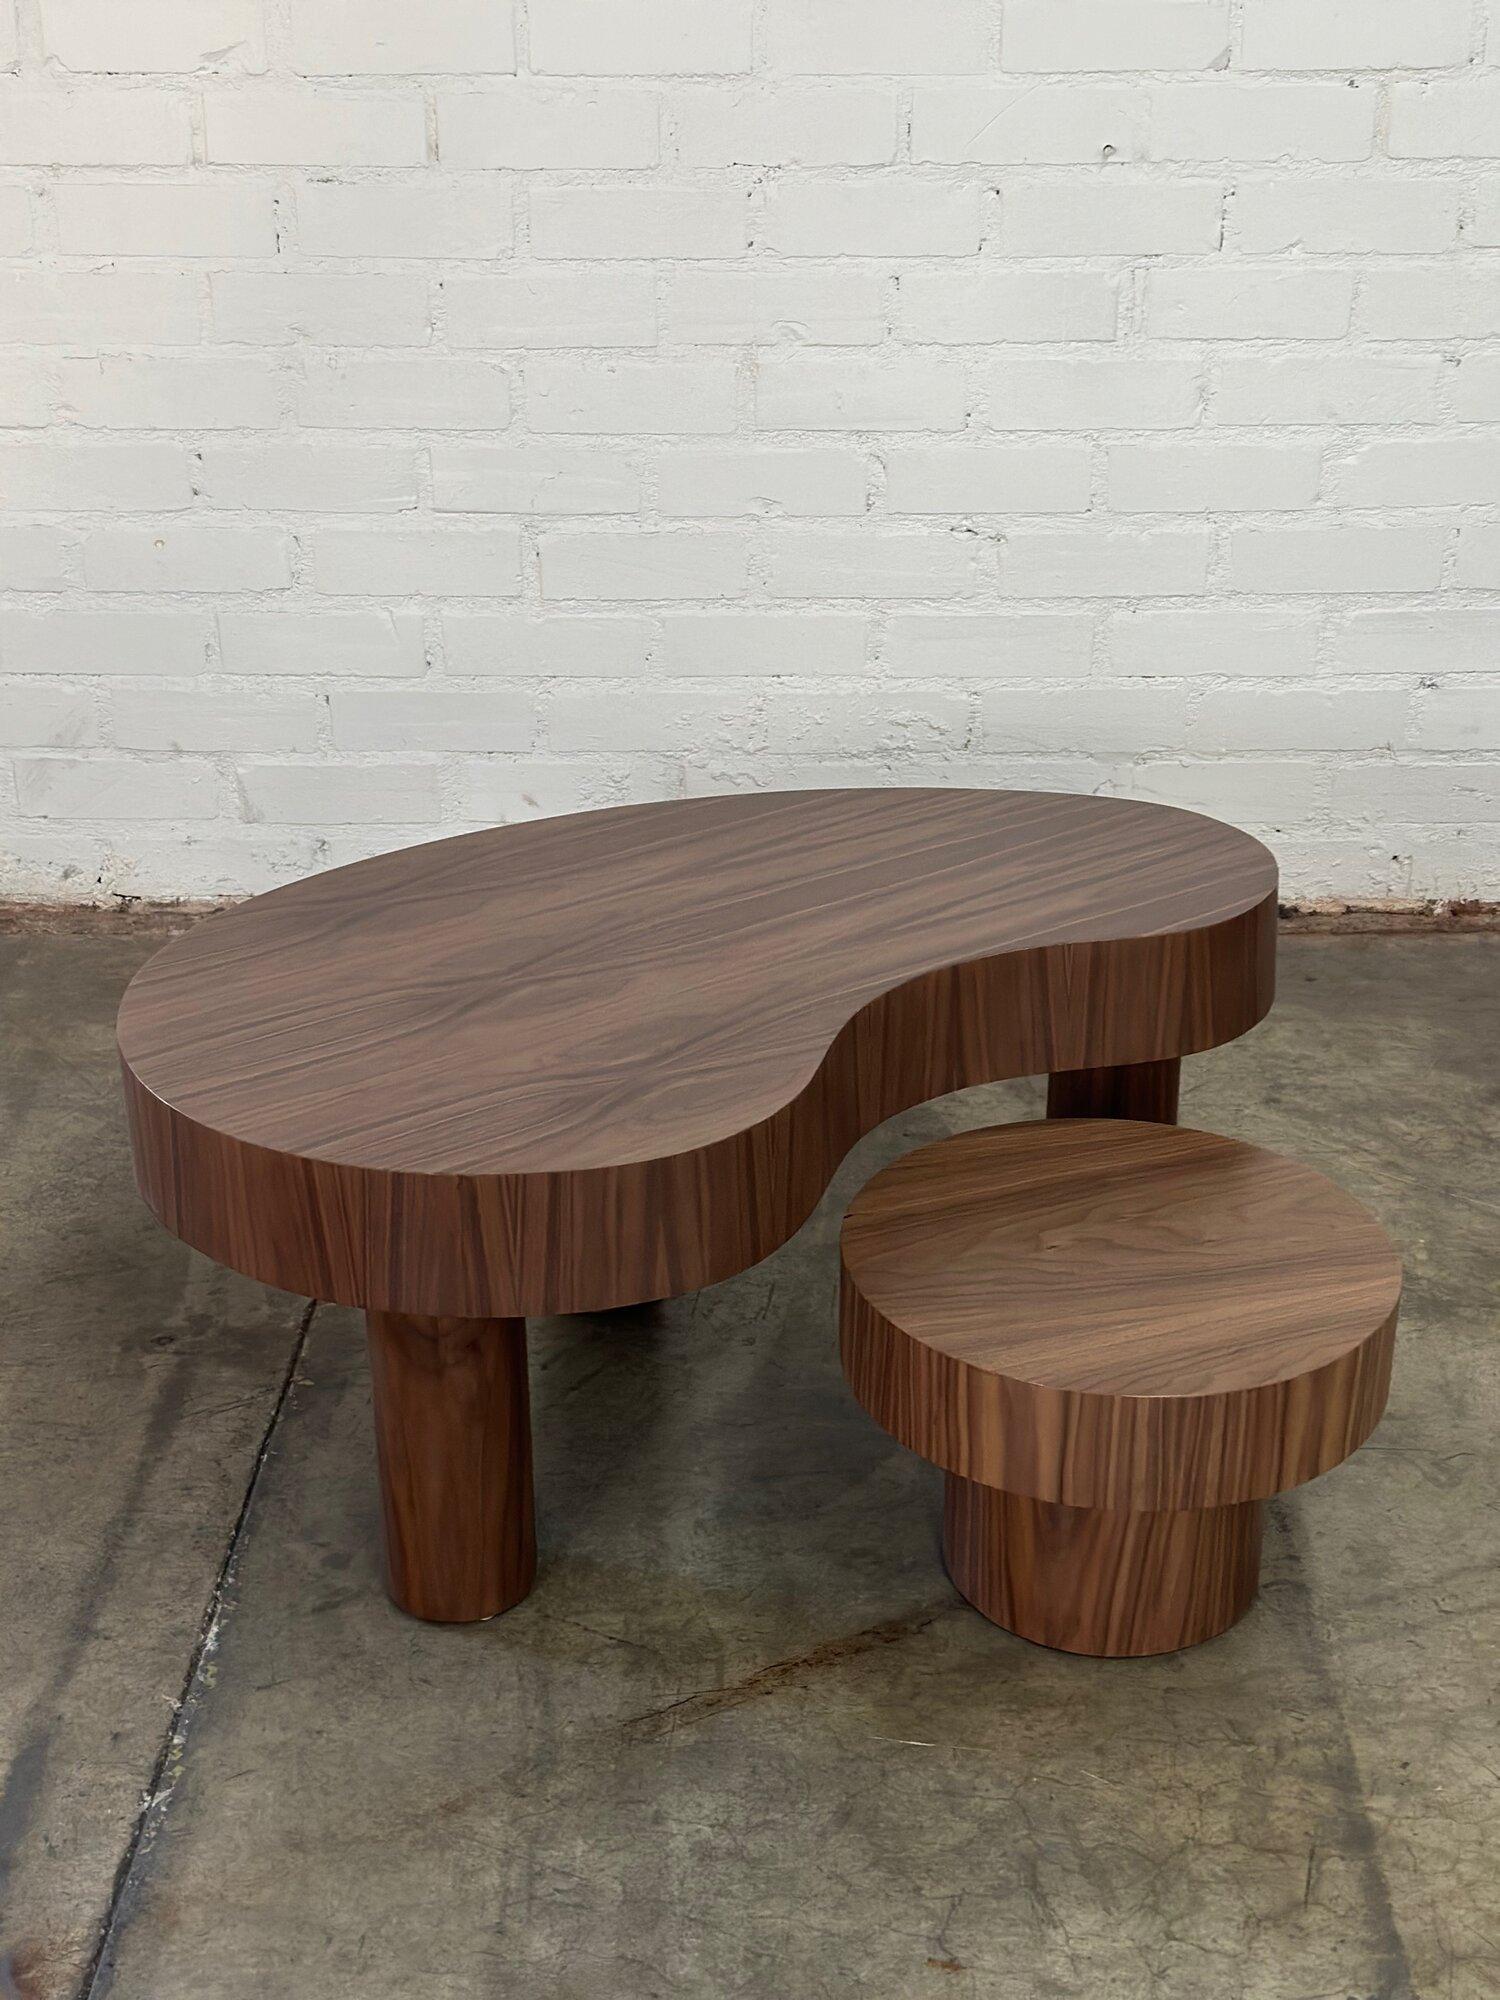 W43 D26 D13.5 H18

Nesting table W17.5 H12.5

Handcrafted Kidney coffee table made in house by Vintage On Point. Made in solid wood framing and veneered in walnut. Small side table can be pushed underneath larger table or pulled out as desired for